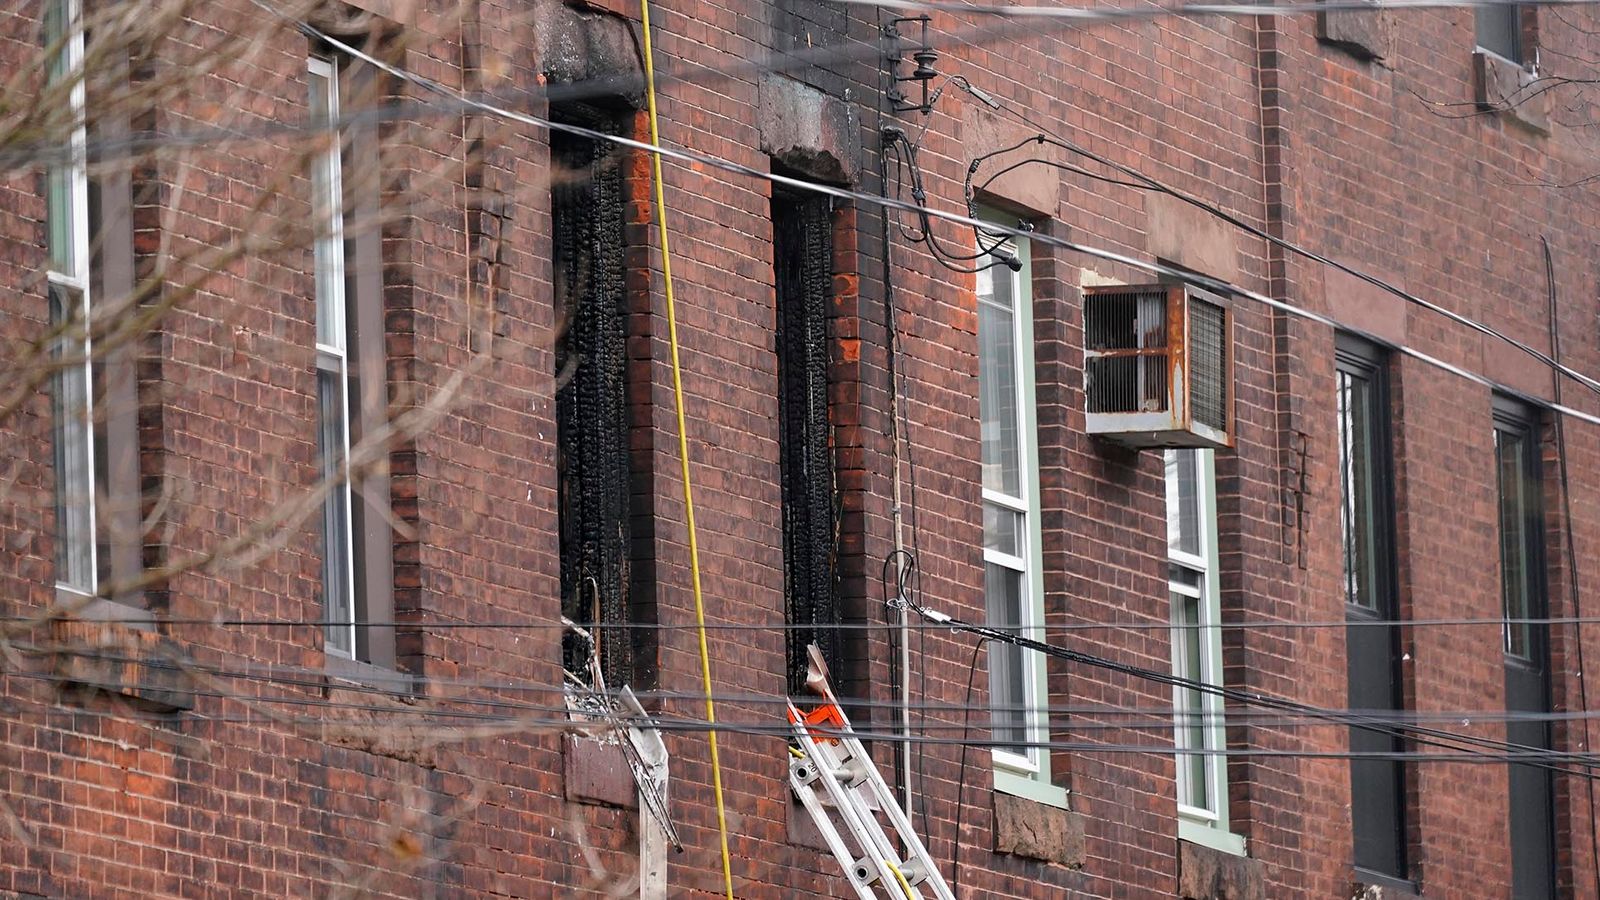 Philadelphia house fire: Seven children among 13 killed after smoke alarms apparently fail